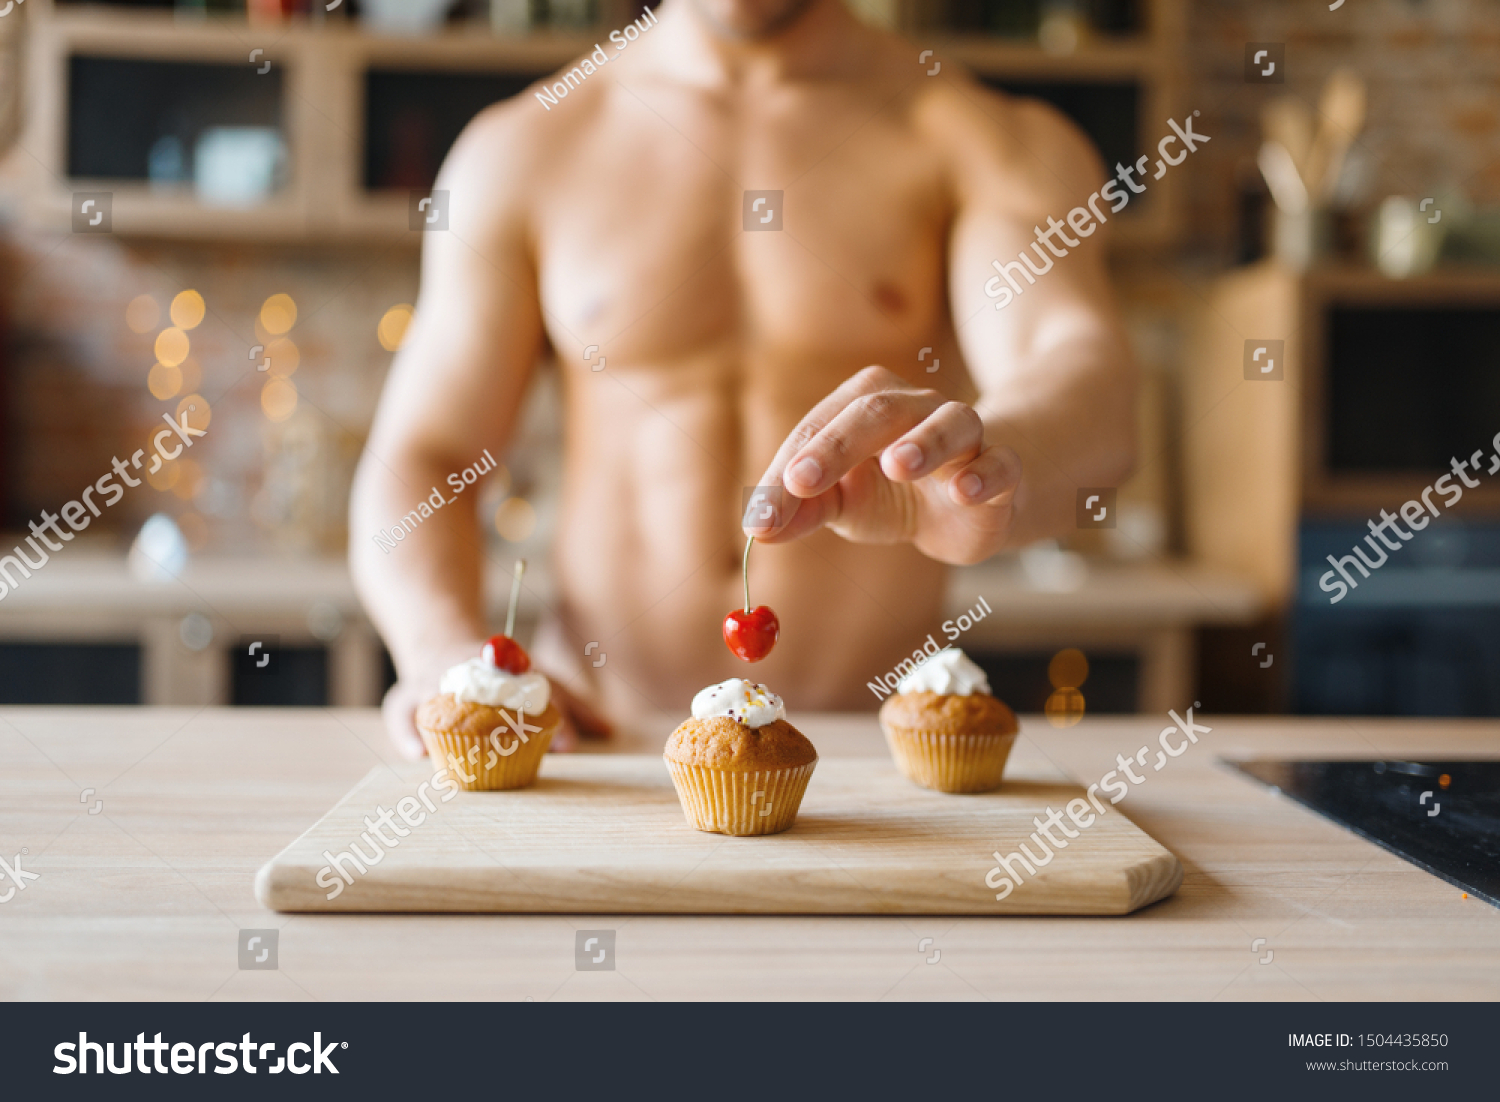 4 374 Naked Cooking Images Stock Photos Vectors Shutterstock